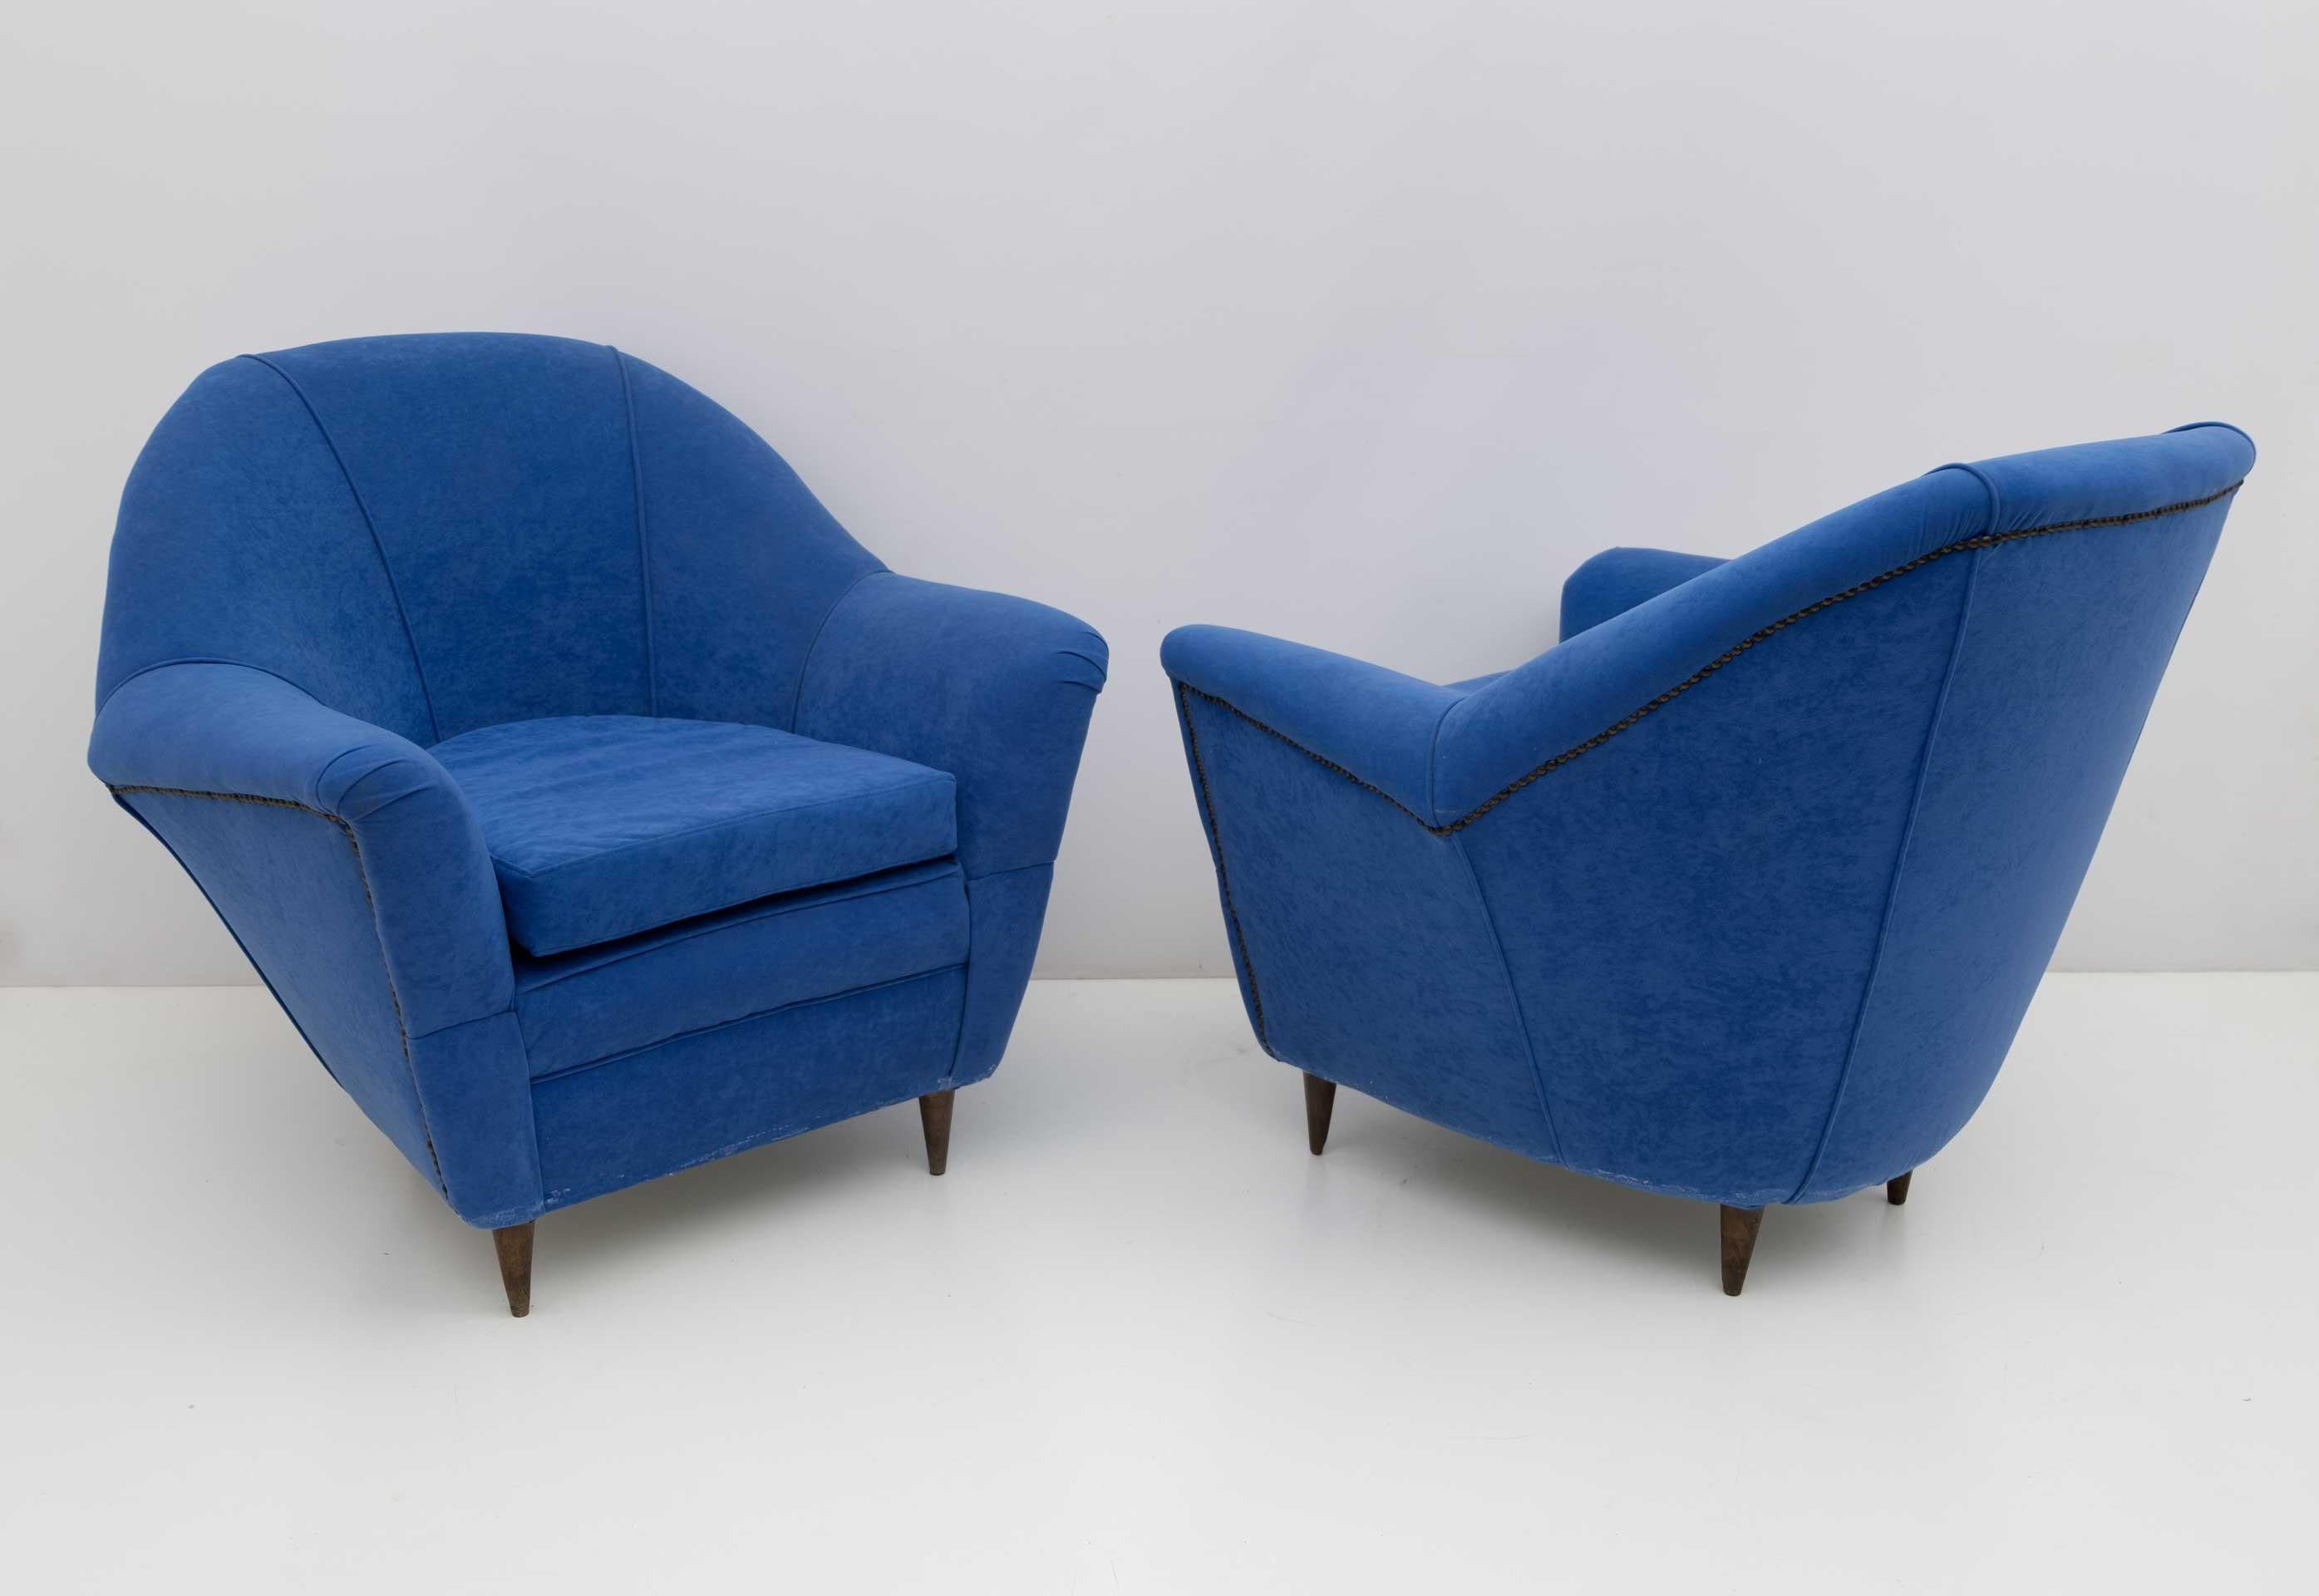 Pair of iconic armchairs designed by Ico Parisi for Ariberto Colombo Cantù.
Very elegant and comfortable, with upholstery redone in recent years but new upholstery is recommended.